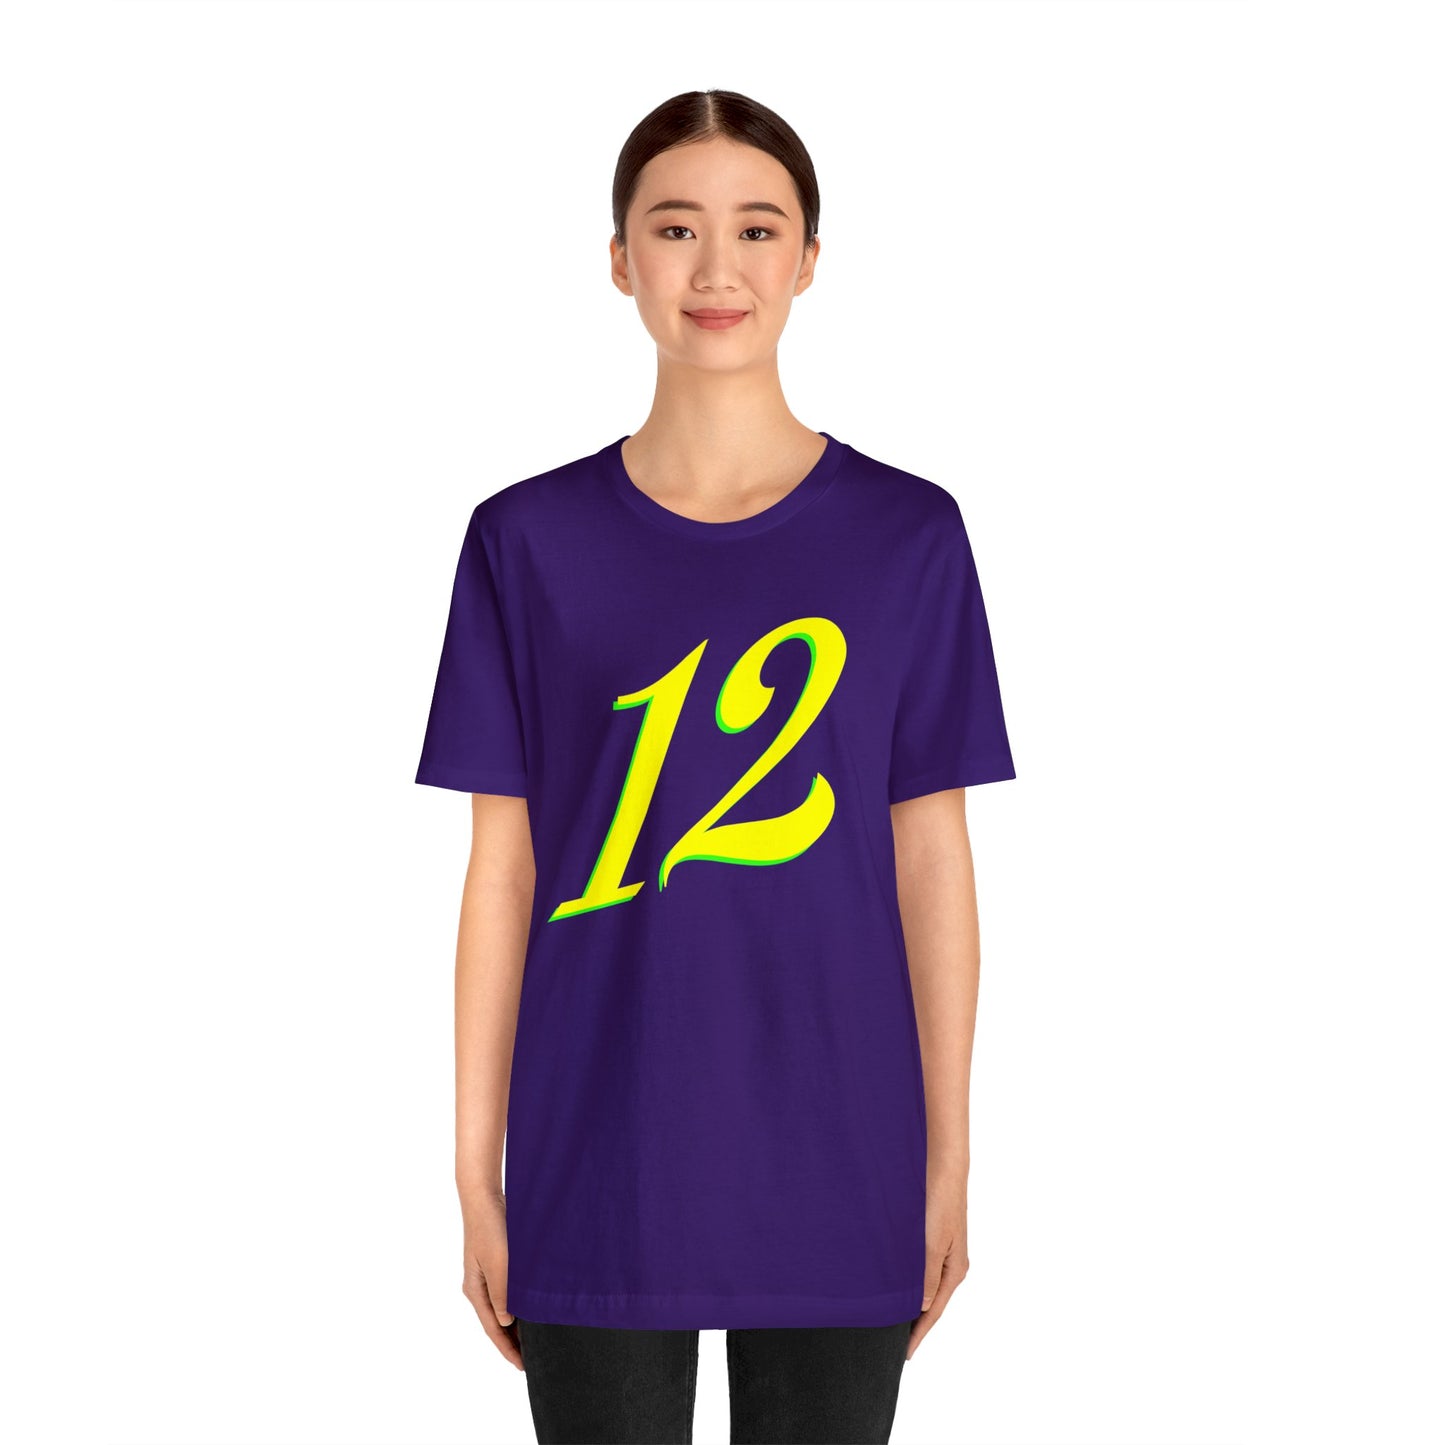 Number 12 Design - Soft Cotton Tee for birthdays and celebrations, Gift for friends and family, Multiple Options by clothezy.com in Asphalt Size Medium - Buy Now